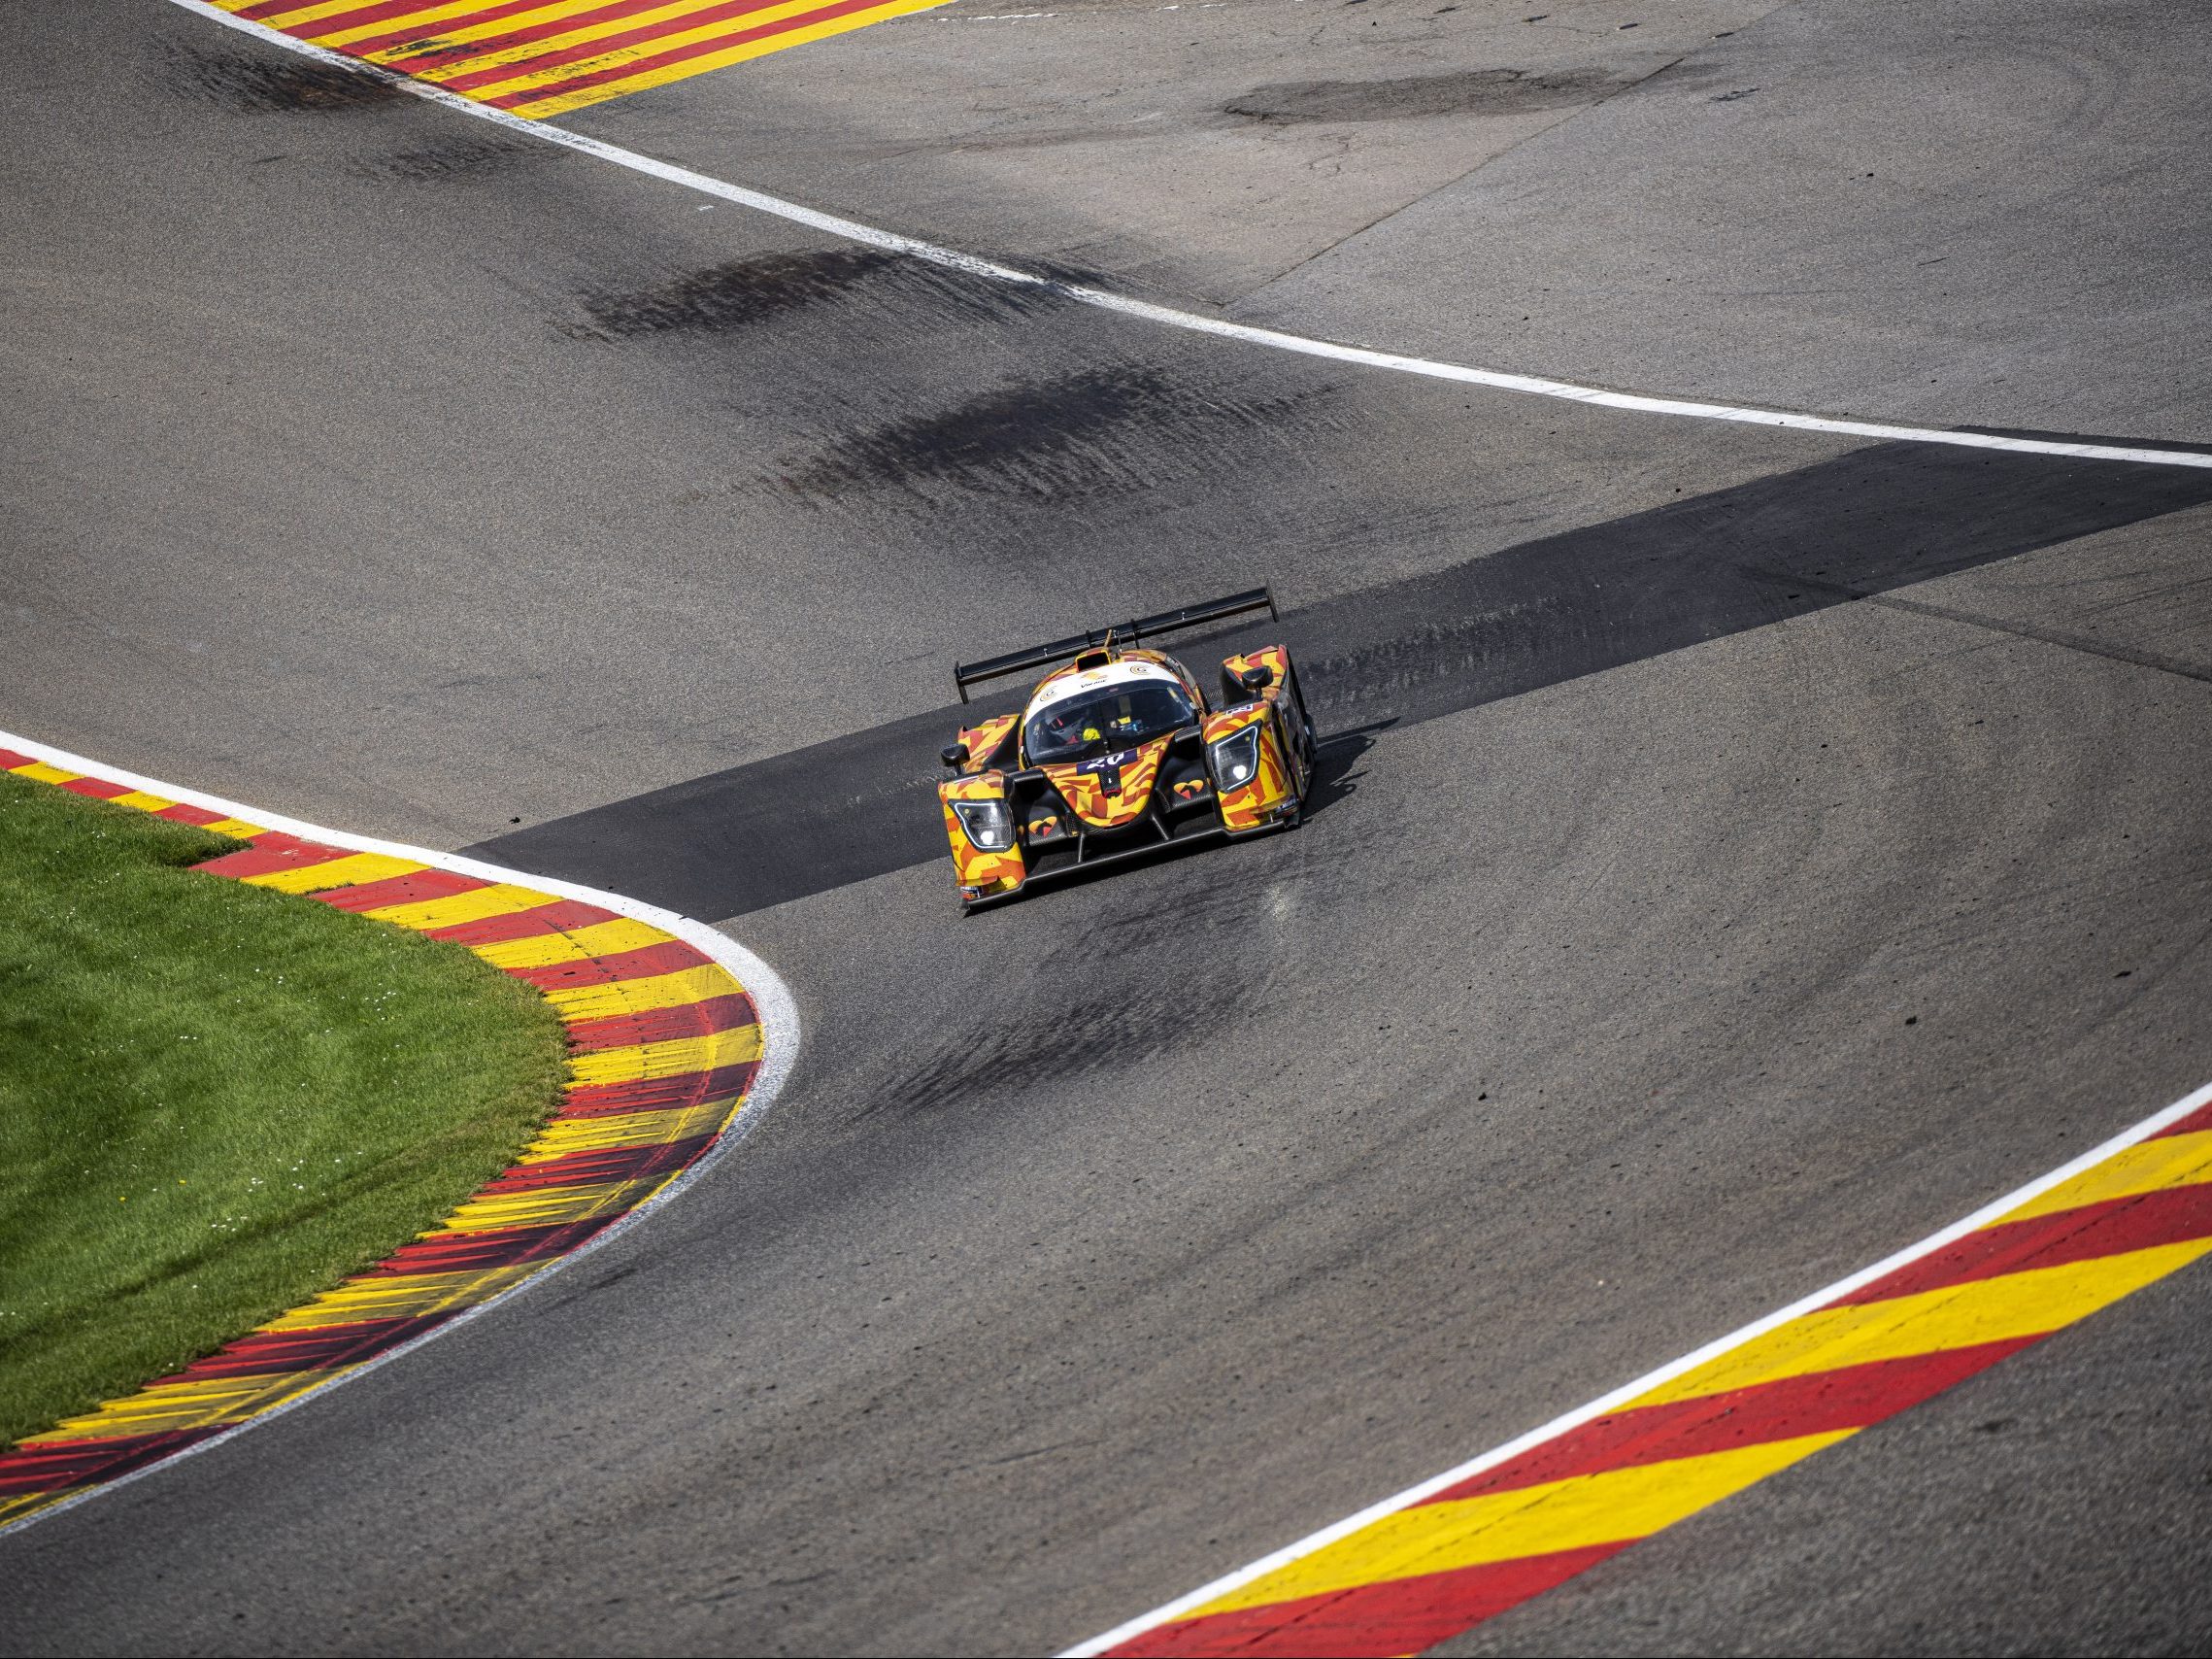 Team Virage scores another top 5 in the ELMS in Spa-Francorchamps